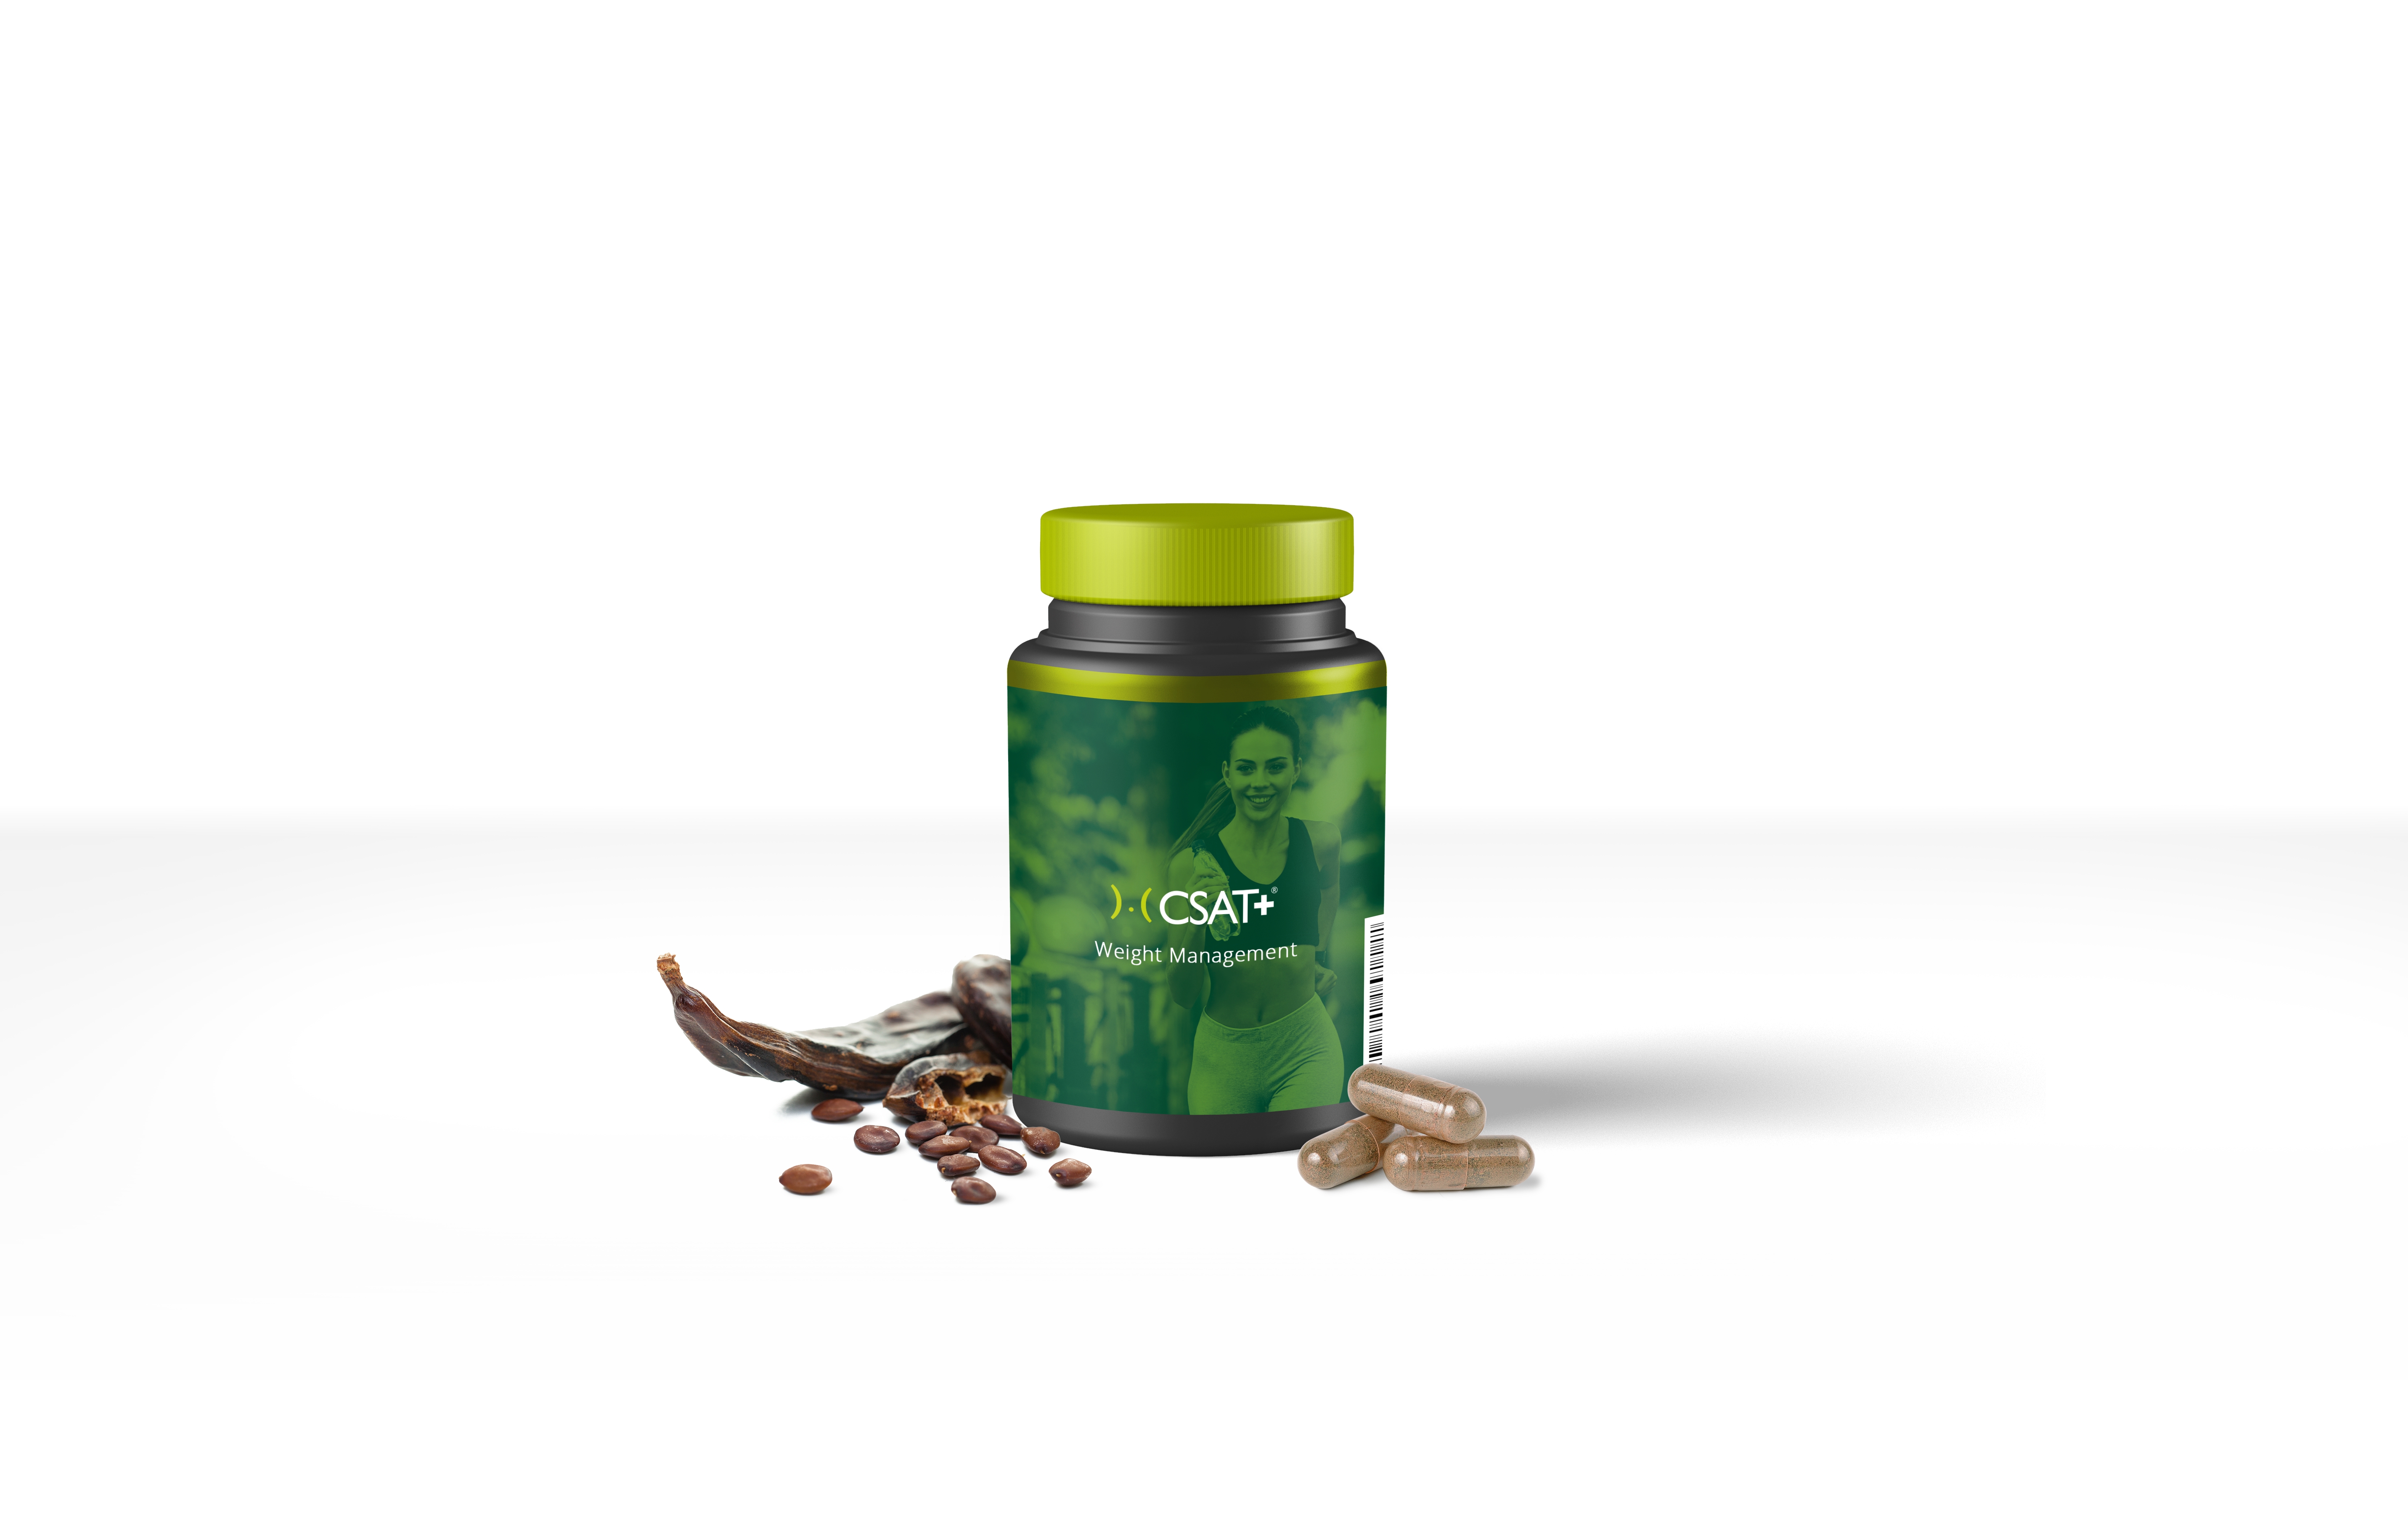 CSAT+®. METABOLIC SYNDROME AND WEIGHT MANAGEMENT - CAROB BEAN EXTRACT